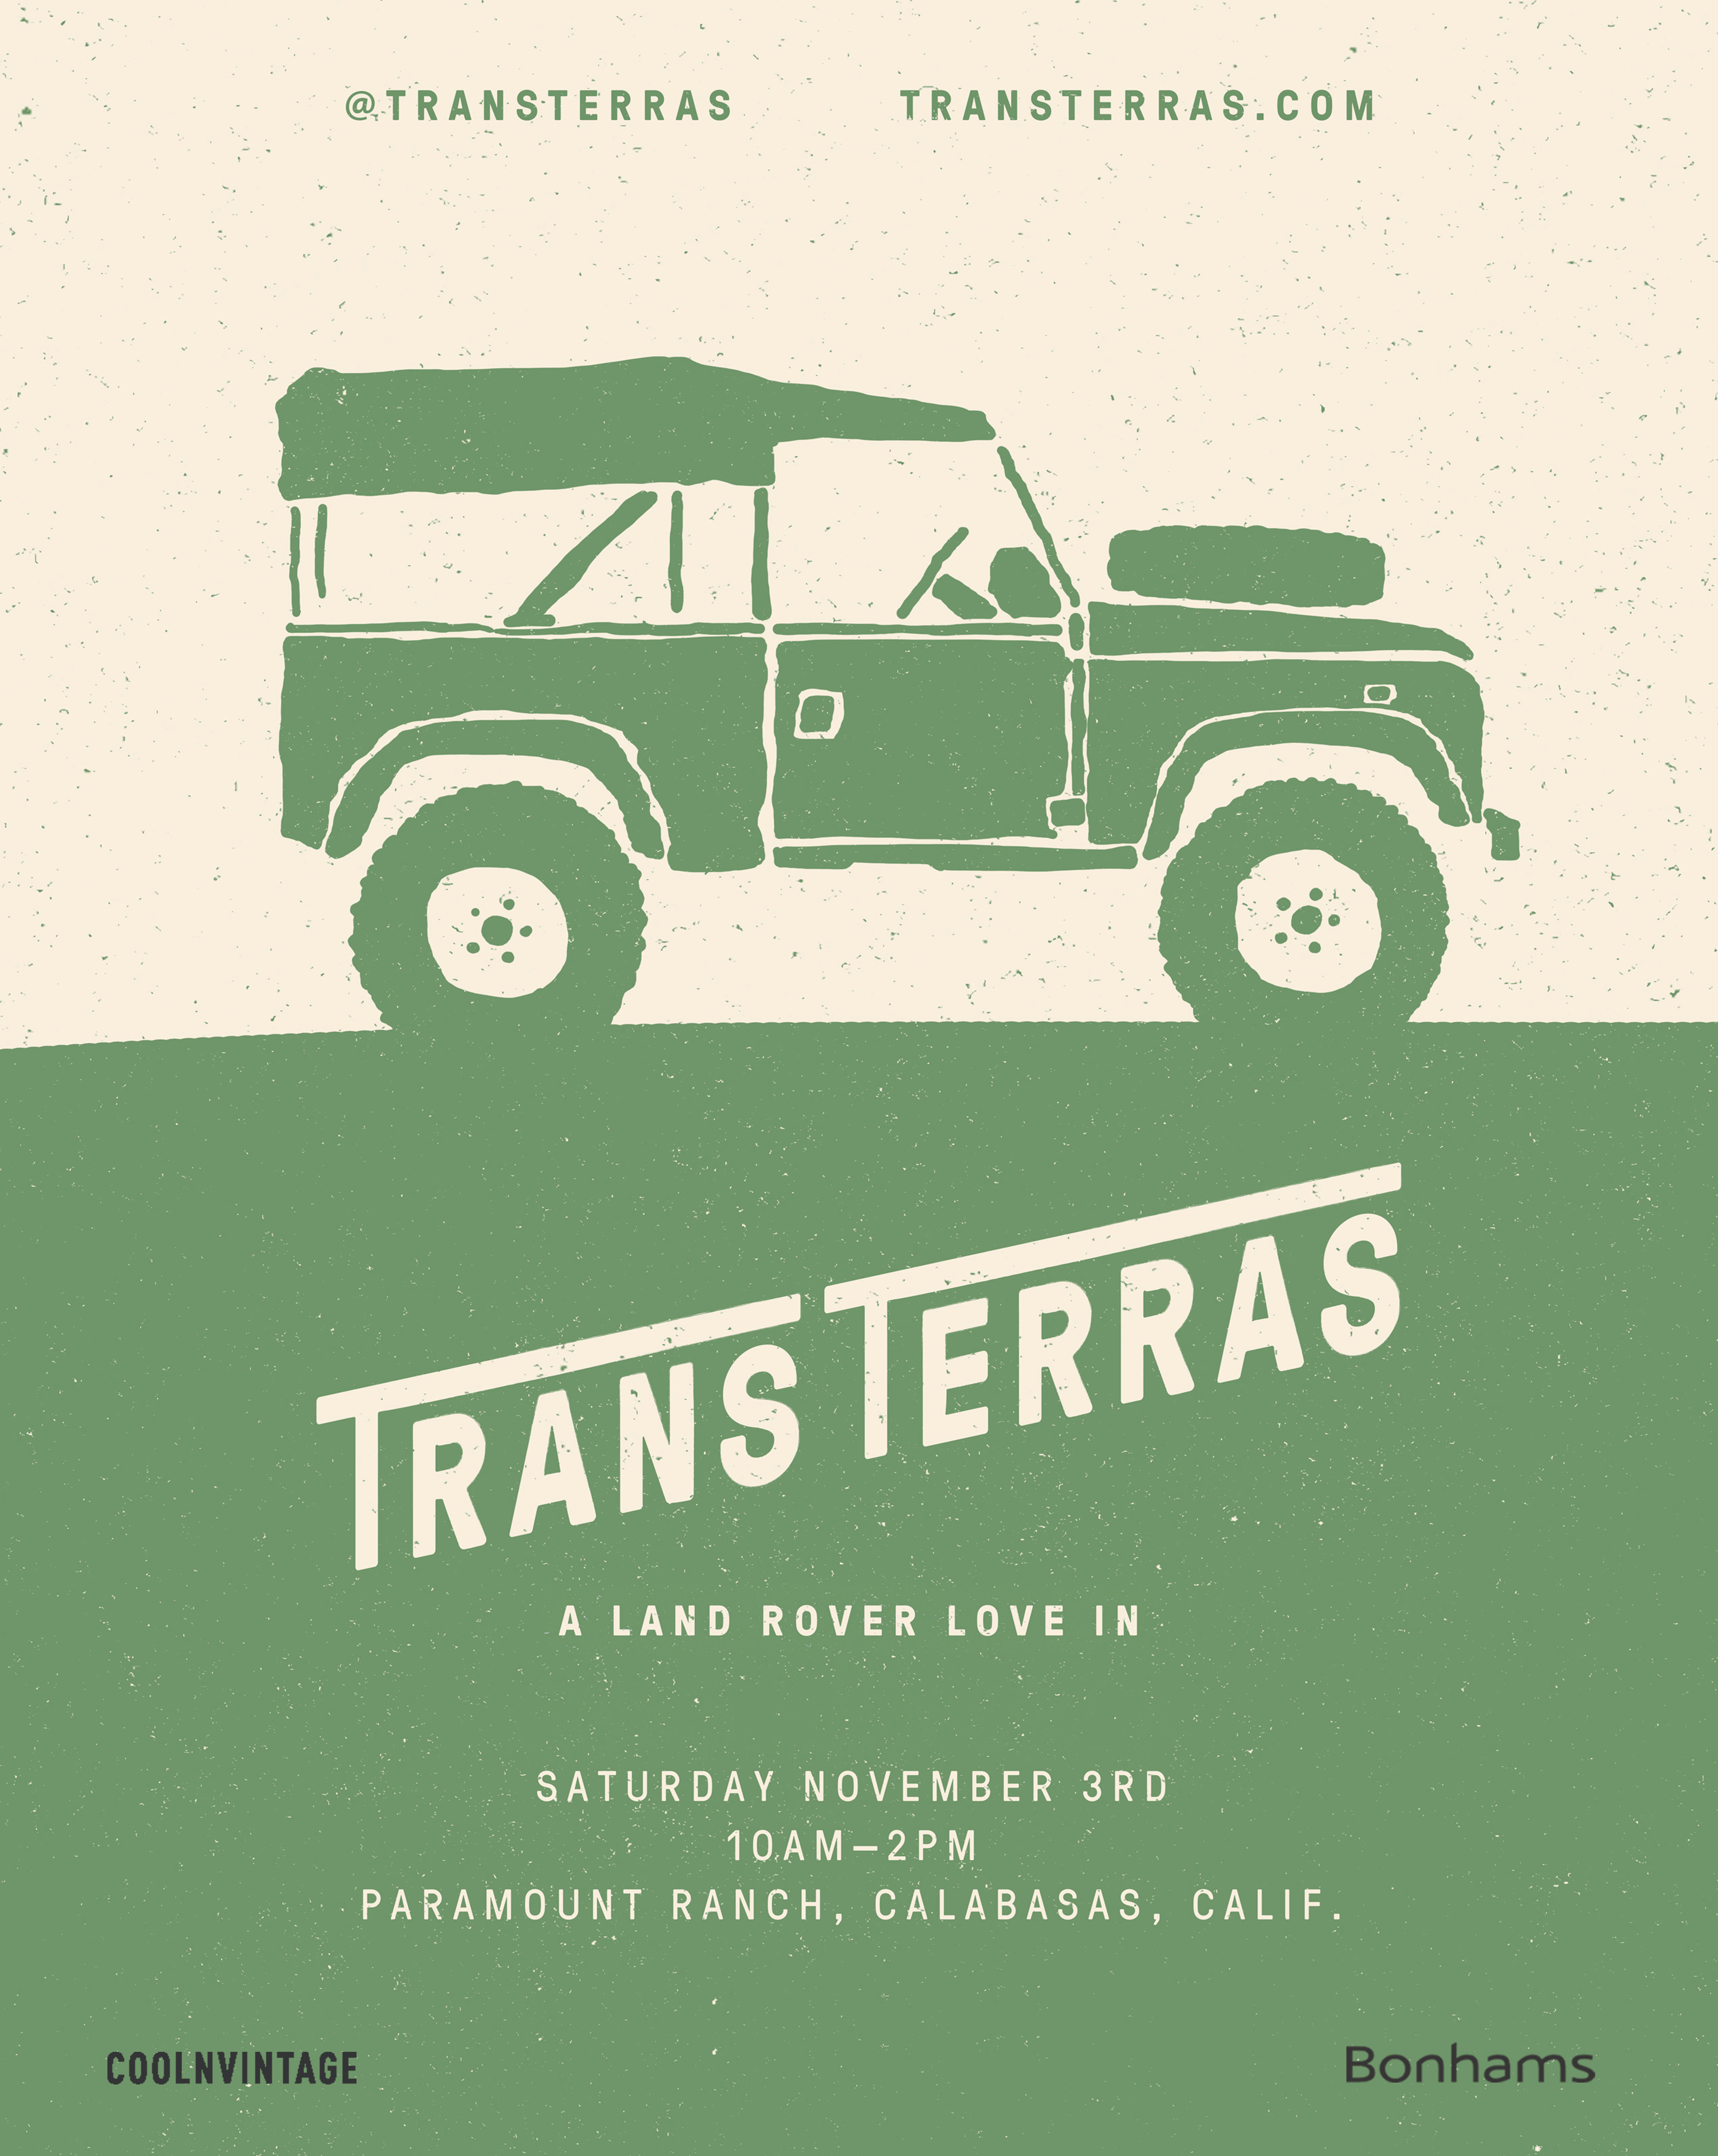 trans terras, ‘Land Rover love in’ scheduled for November 3, ClassicCars.com Journal